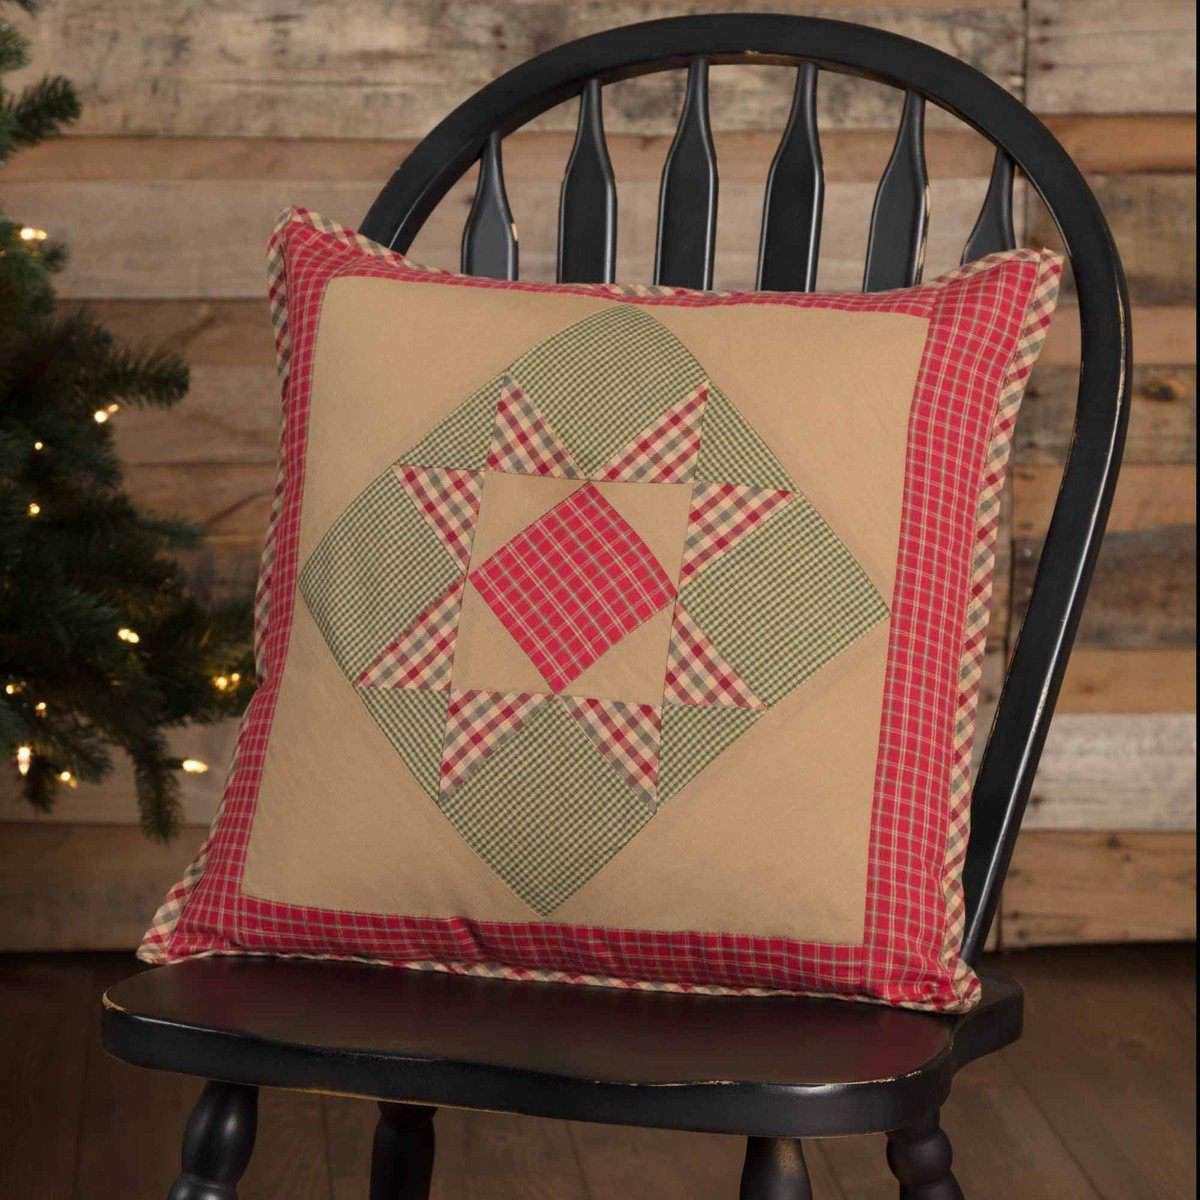 Dolly Star Patchwork Pillow 18x18 VHC Brands online